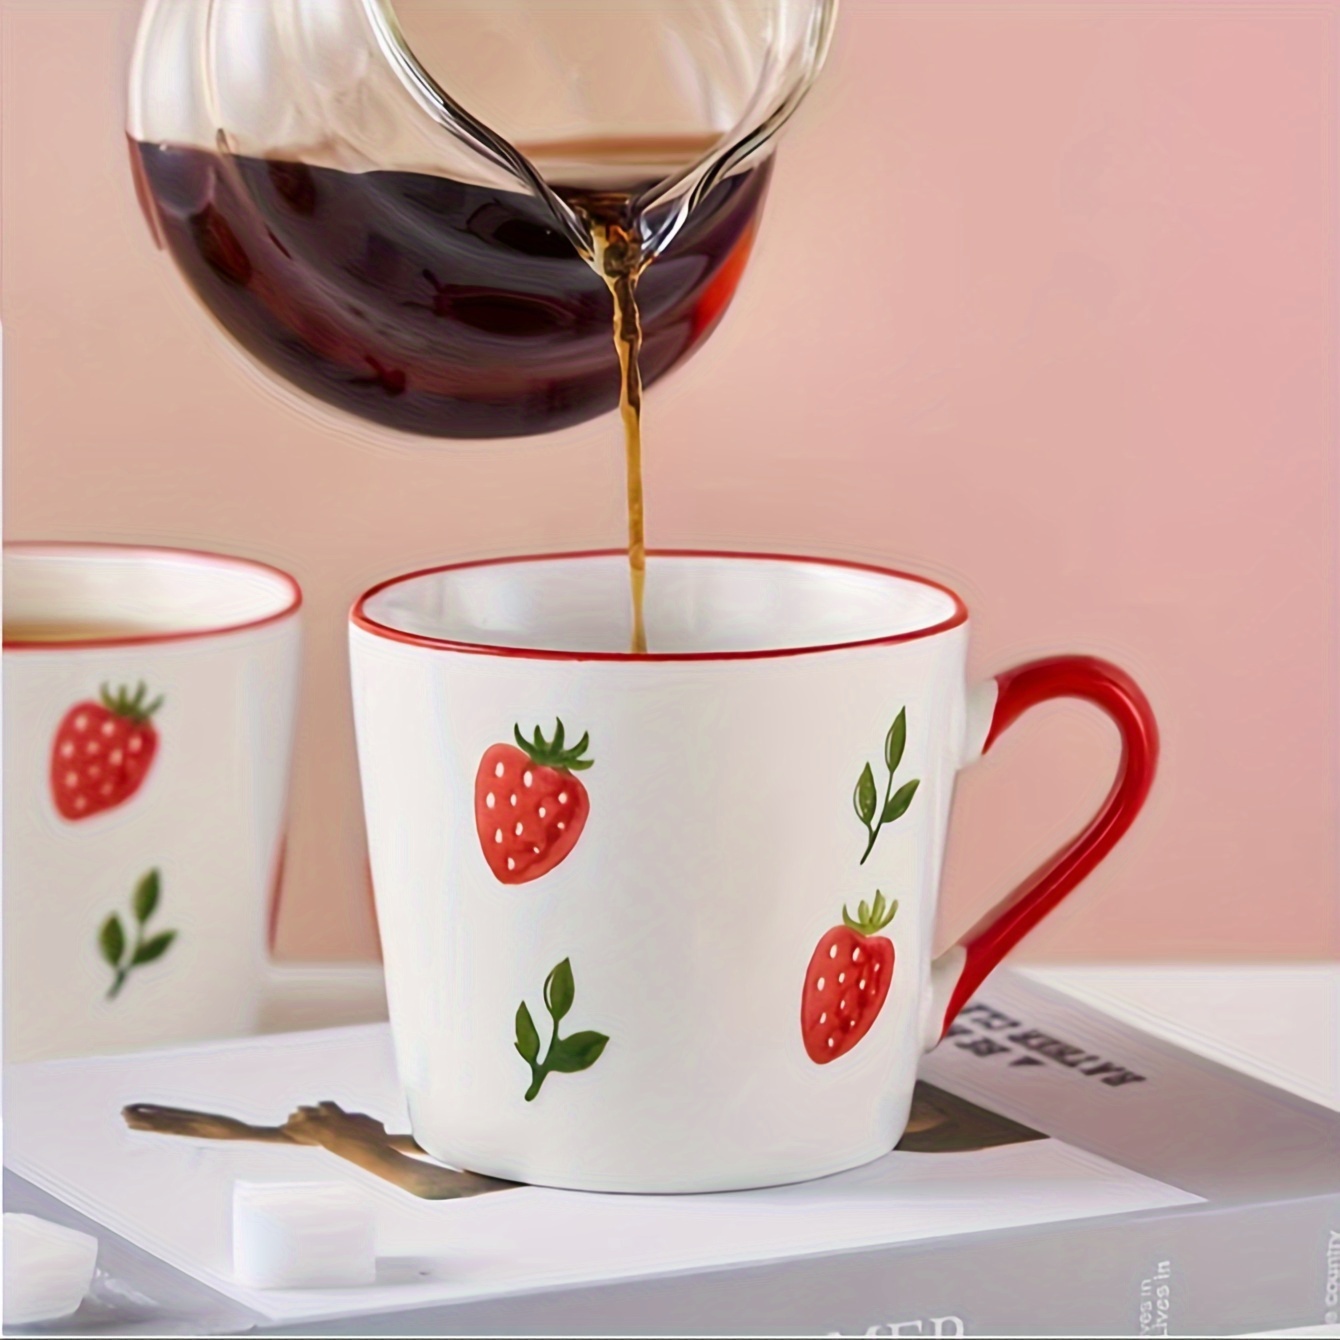 

Charming Fruit Pattern Ceramic Coffee Mug - Perfect For Gifting On Christmas, Valentine's Day & More - Bpa-free, Reusable, Ideal For Family, Colleagues, Teachers